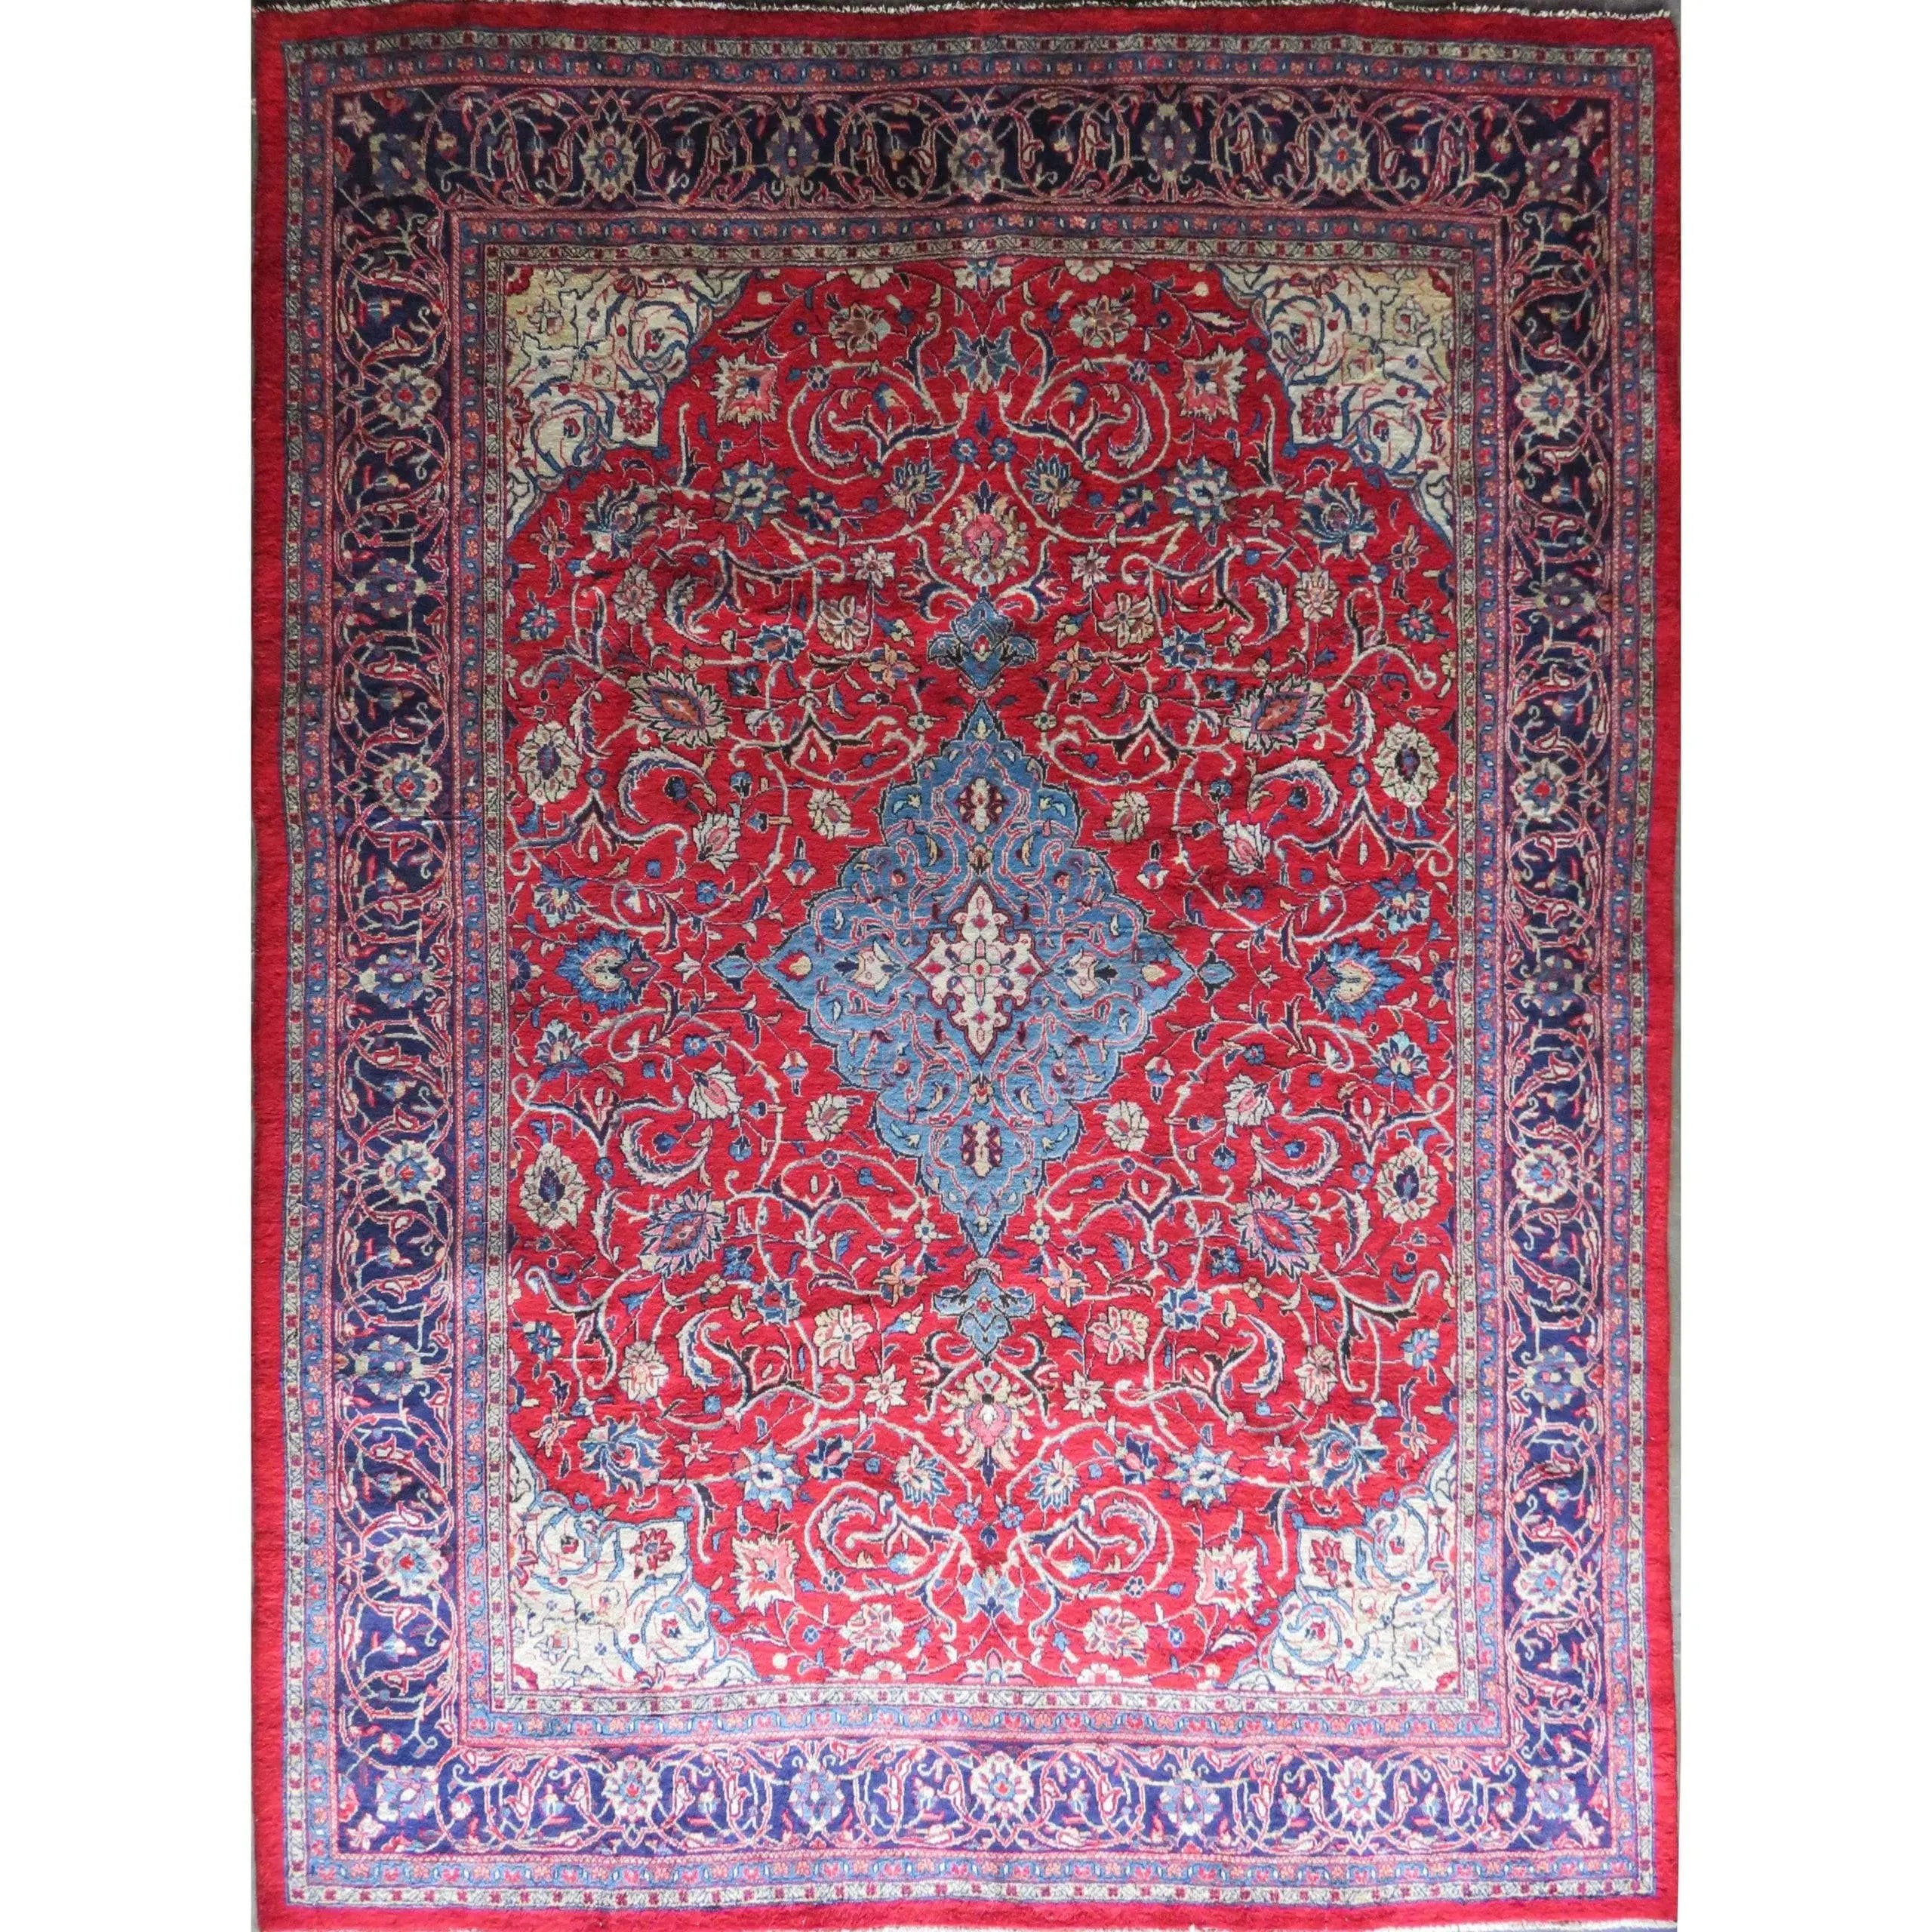 Hand-Knotted Persian Wool Rug – Luxurious Vintage Design, 13'2" x 9'4", Artisan Crafted